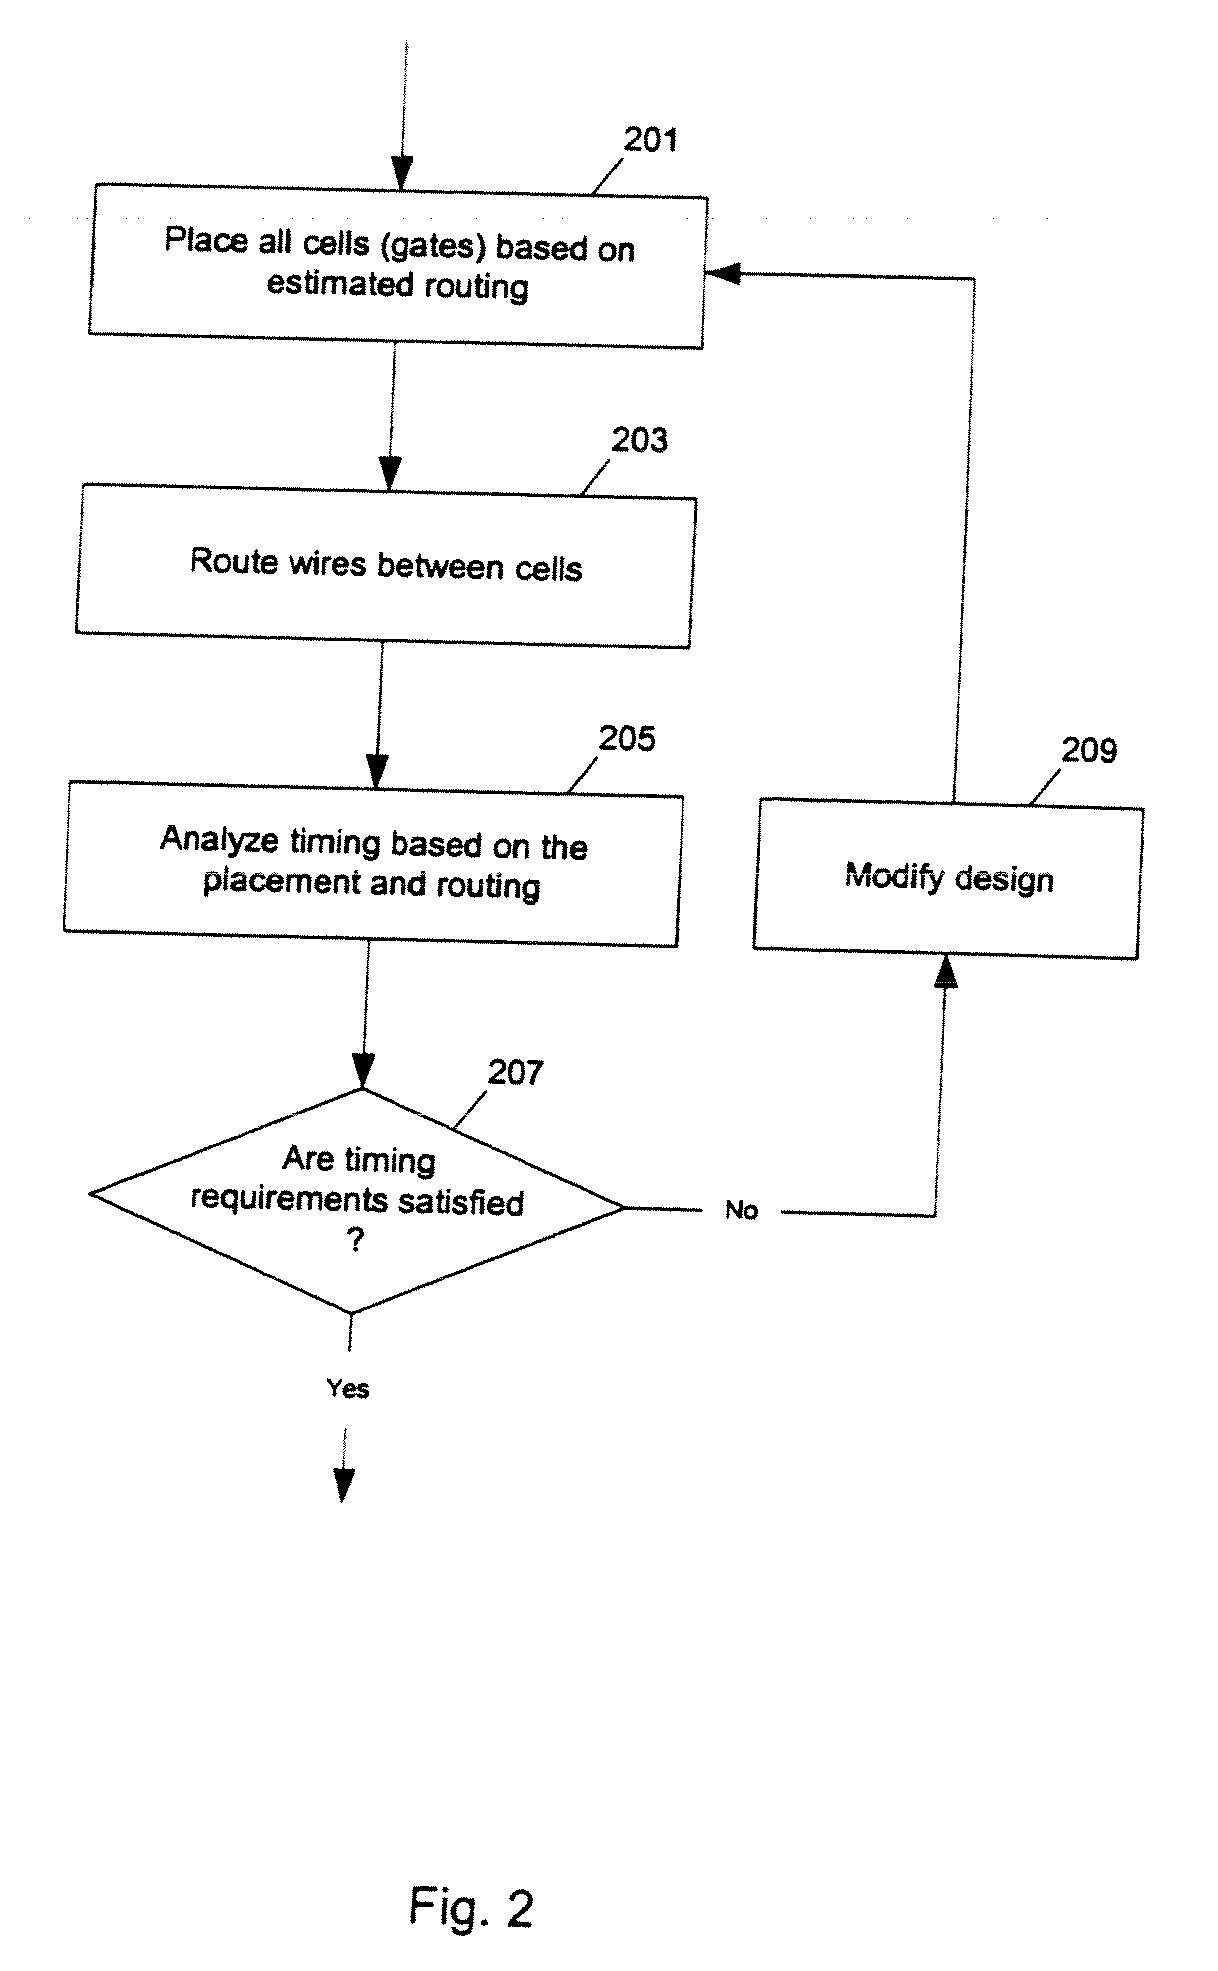 Method and apparatus for placement and routing cells on integrated circuit chips